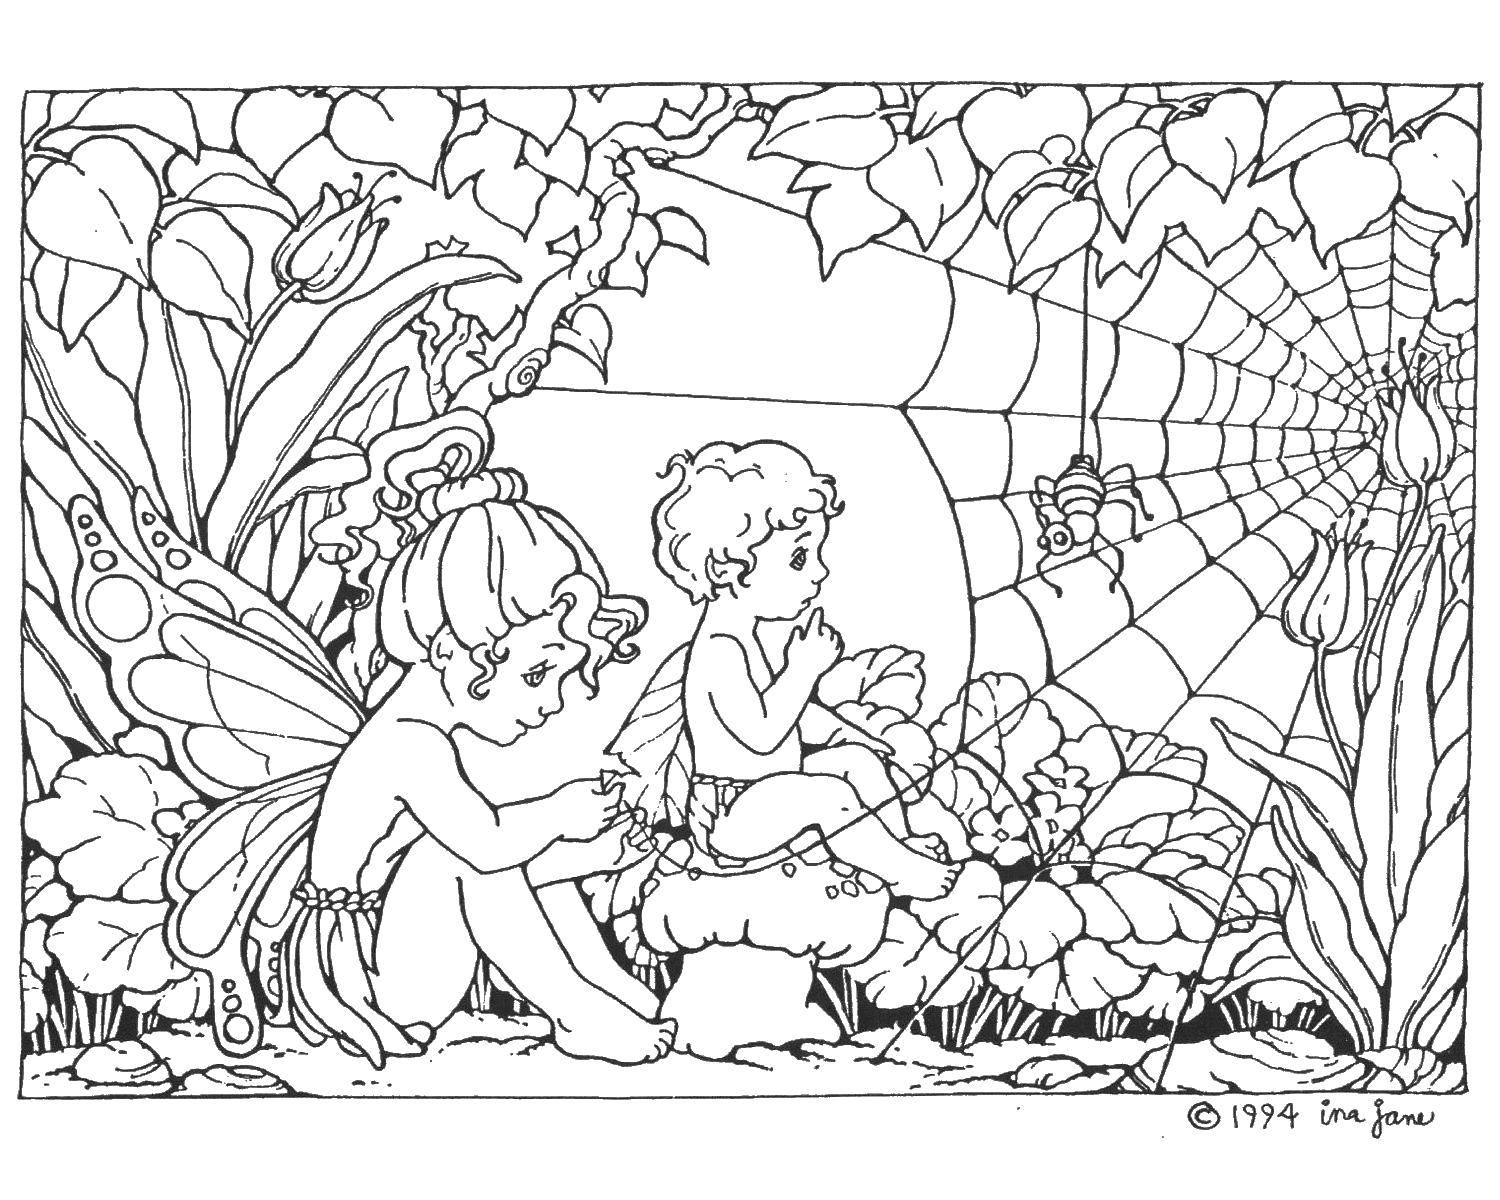 Coloring Fairies. Category Fantasy. Tags:  fairies, kids, girls, wings.